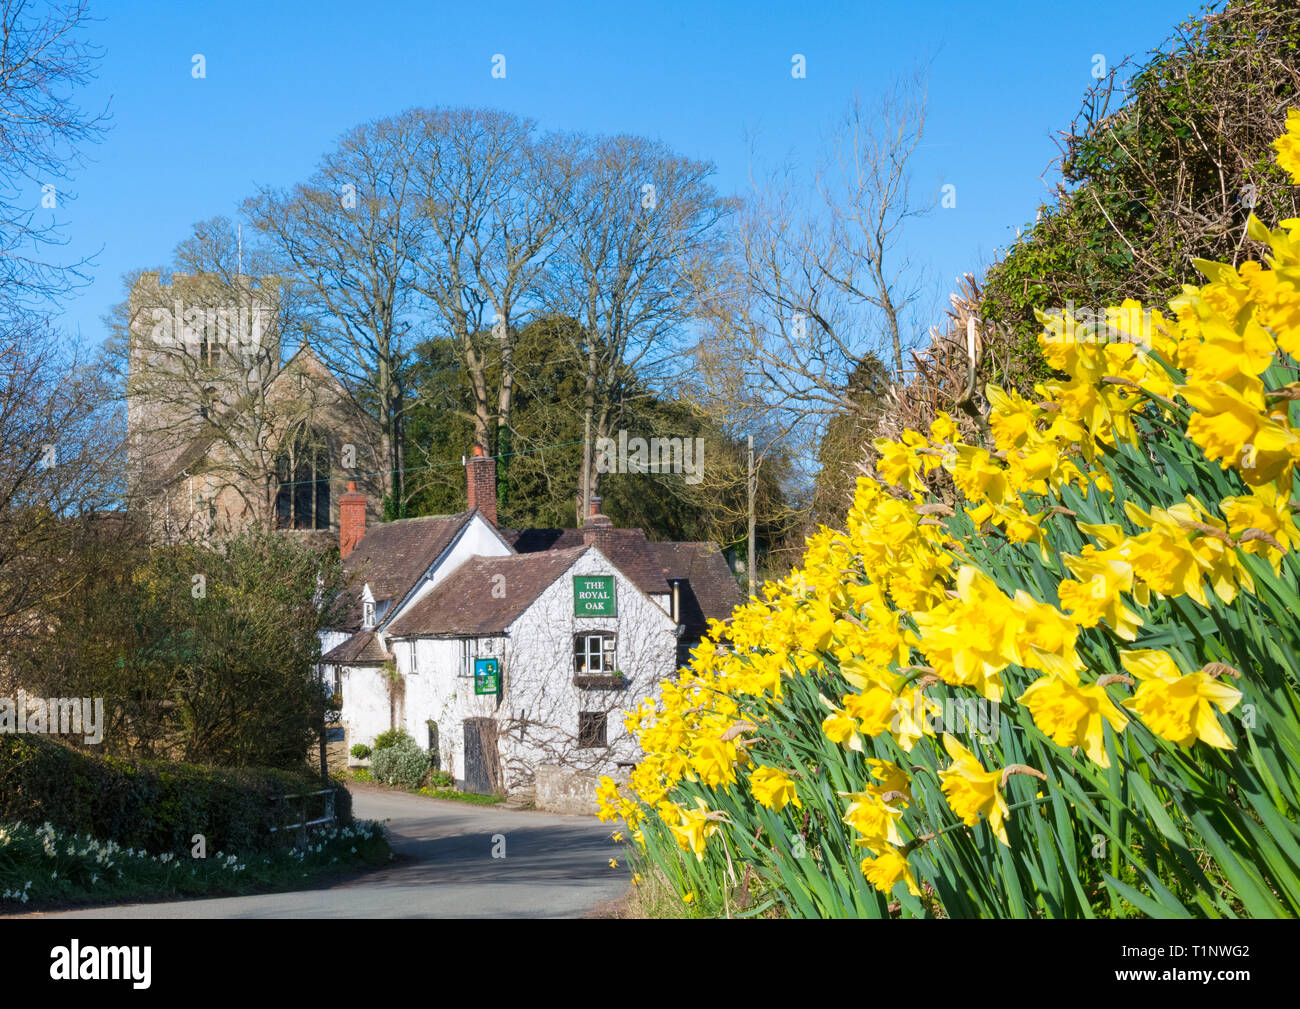 A bank of daffodils near the Royal Oak public house in the village of Cardington, Shropshire. Stock Photo